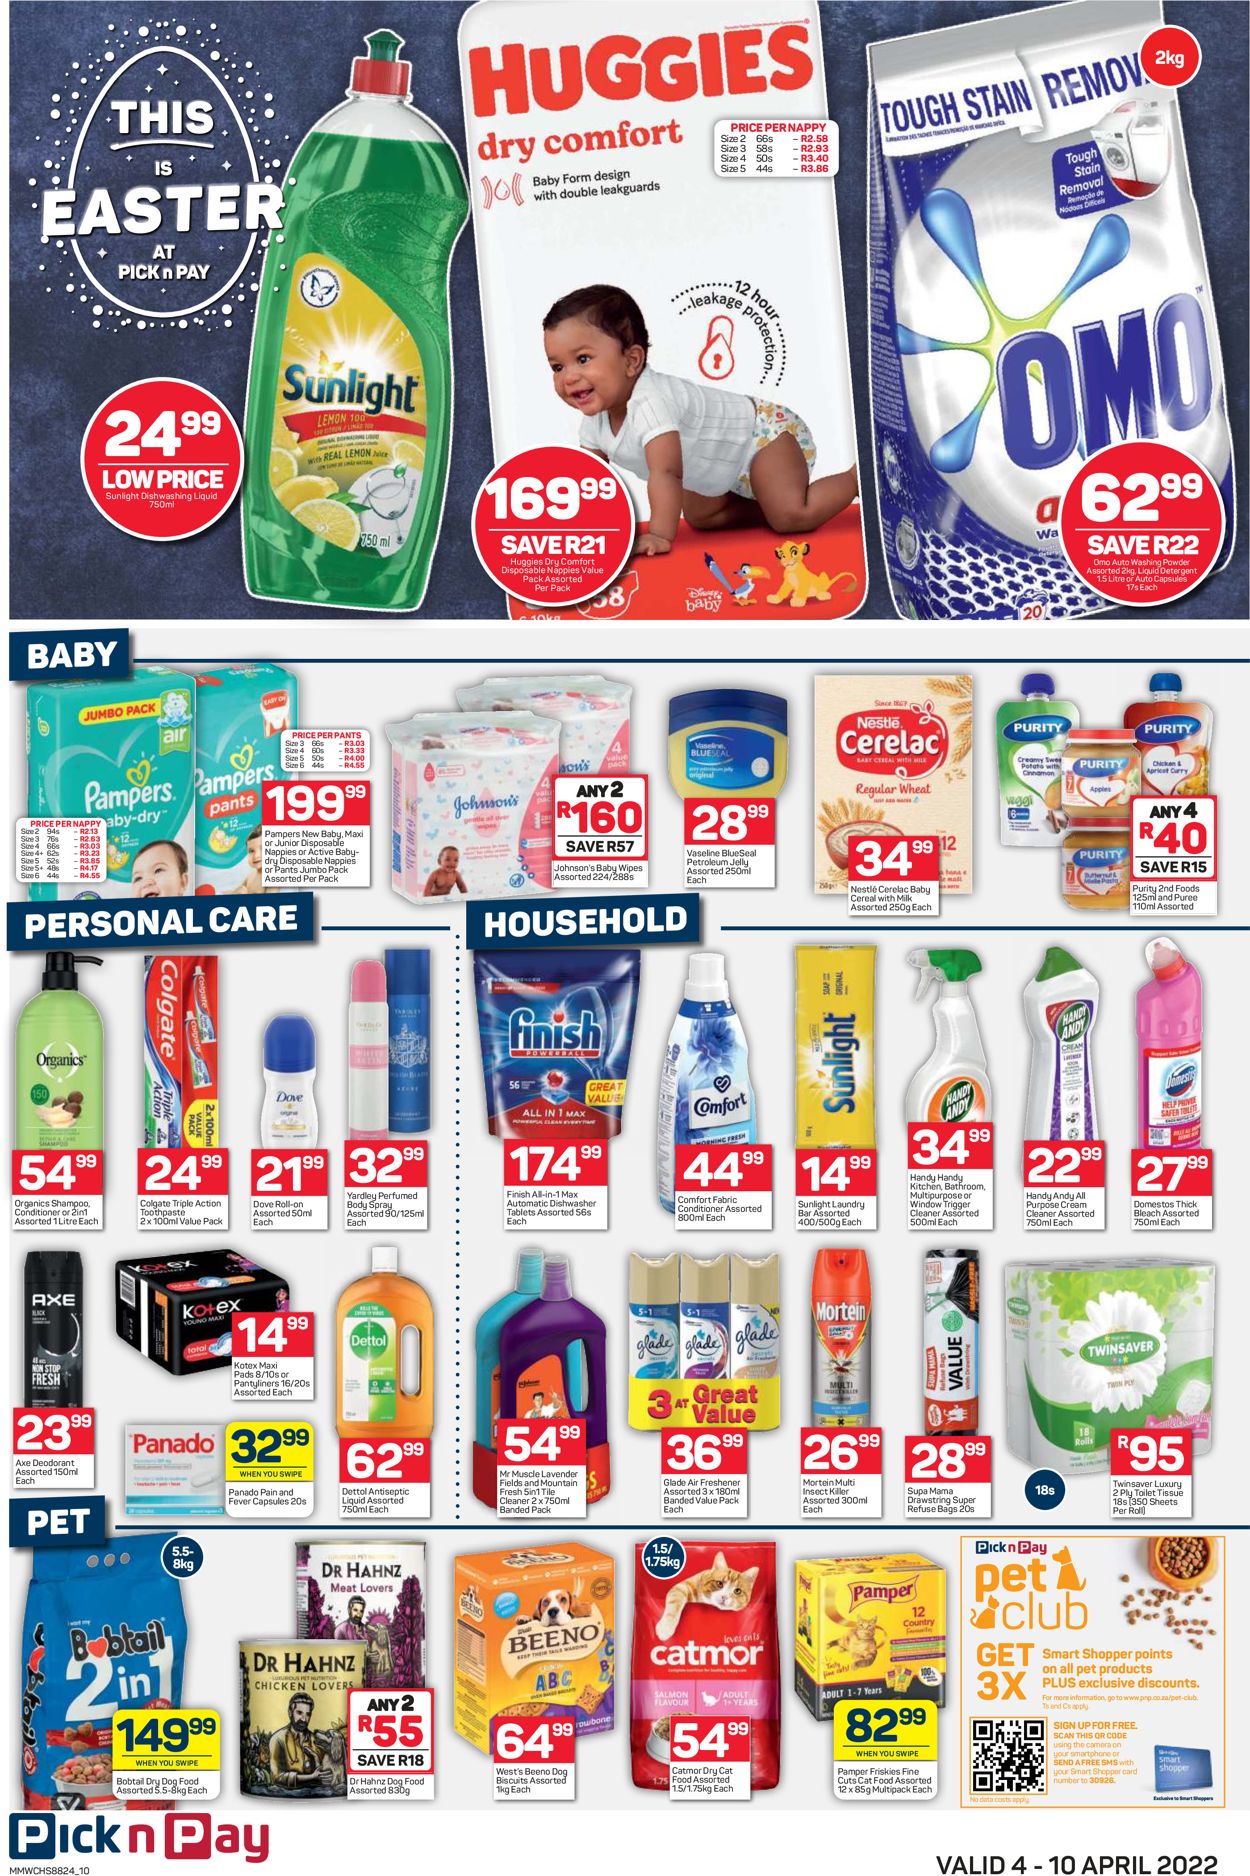 Pick n Pay EASTER 2022 Catalogue - 2022/04/04-2022/04/10 (Page 11)